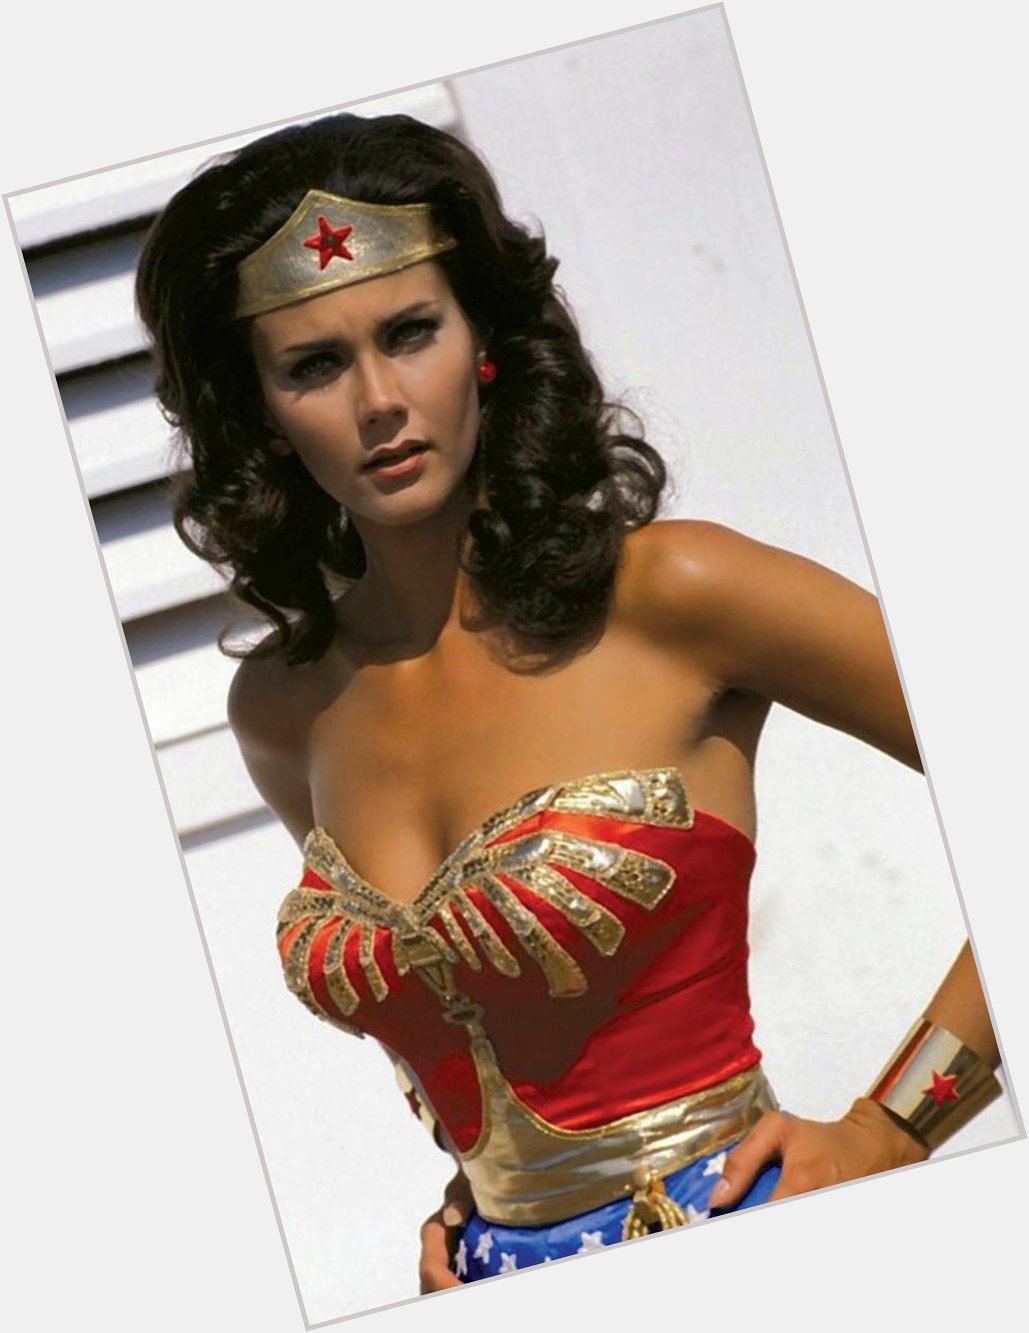 The queen Lynda Carter turns 70 today. An extremely happy birthday to her. For my mental health and yours 